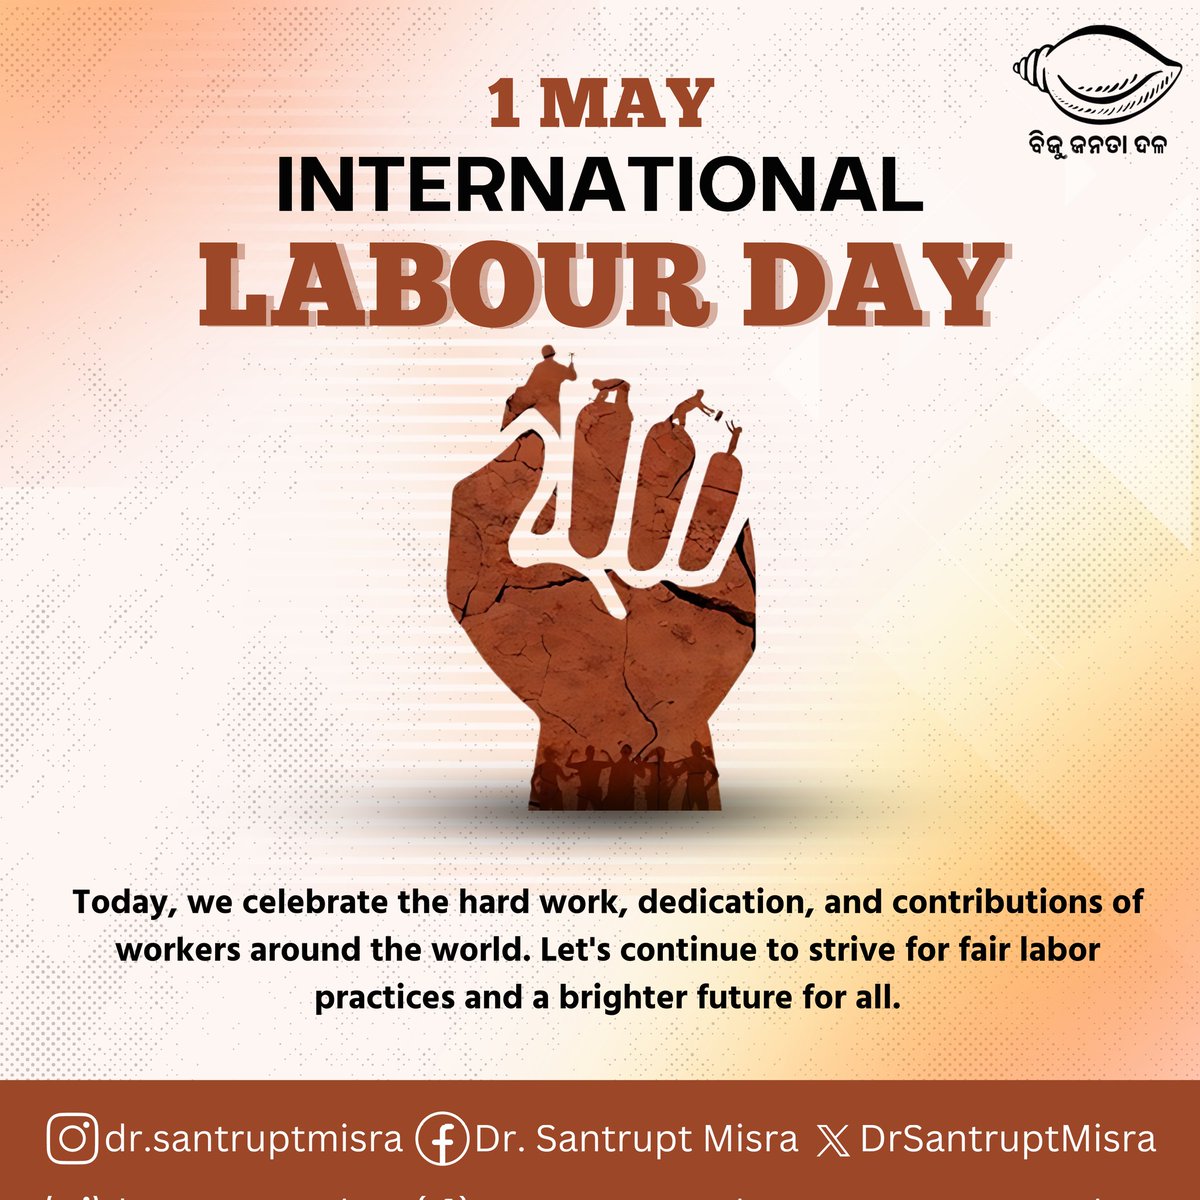 Celebrating the hard work and achievements of workers around the world. Your dedication builds our communities and drives progress. Let's continue to strive for fairness and equity in every workplace. #santrupt4cuttack #santruptmisra #forabettercuttack #drsantruptmisra